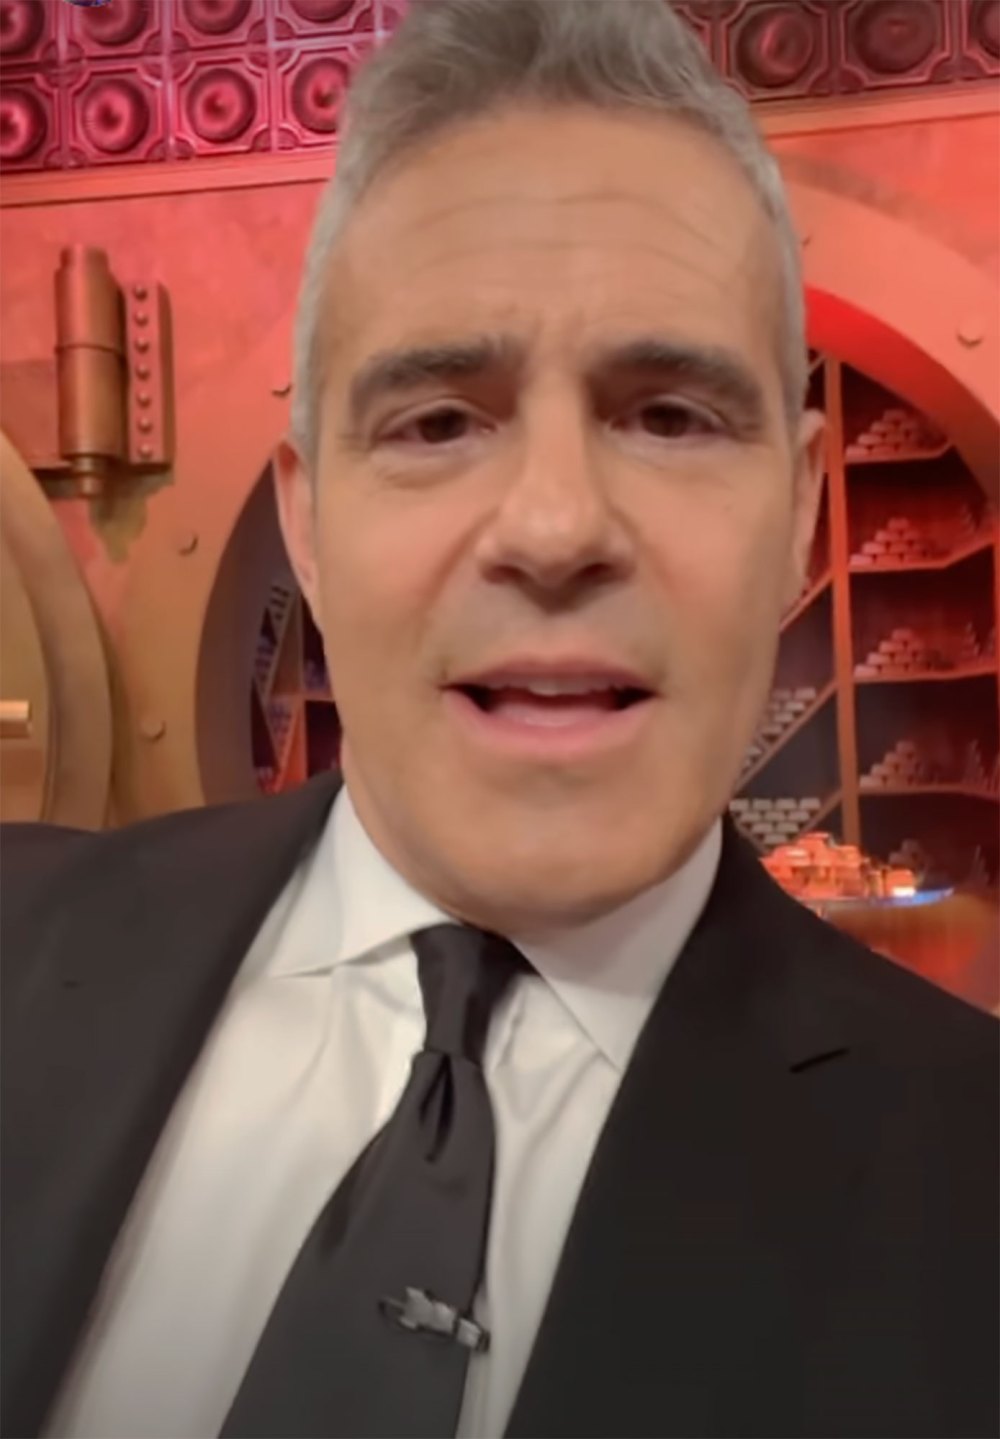 Andy Cohen Apologizes to Larsa Pippen for Yelling at Her While Filming 'The Real Housewives of Miami' Reunion: 'I Don't Like Screaming at Women' black tie